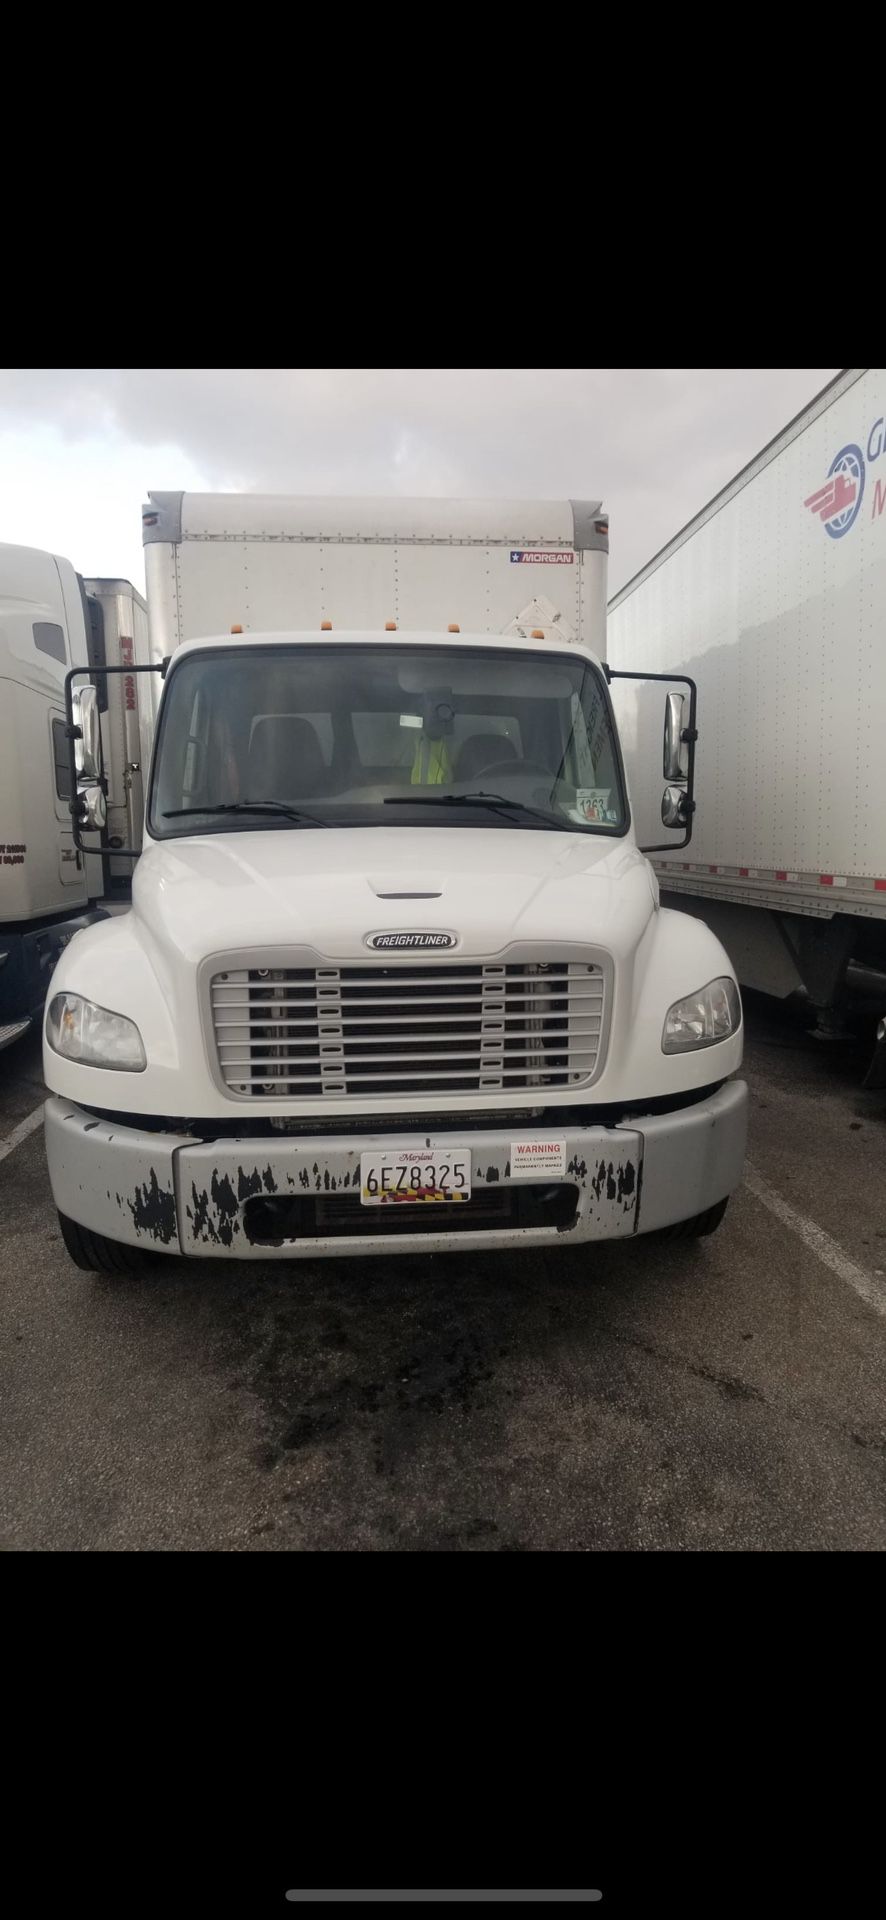 2015 Freightliner  M2 106  Good Condition  Working  Perfectly  With Cummins Engine 